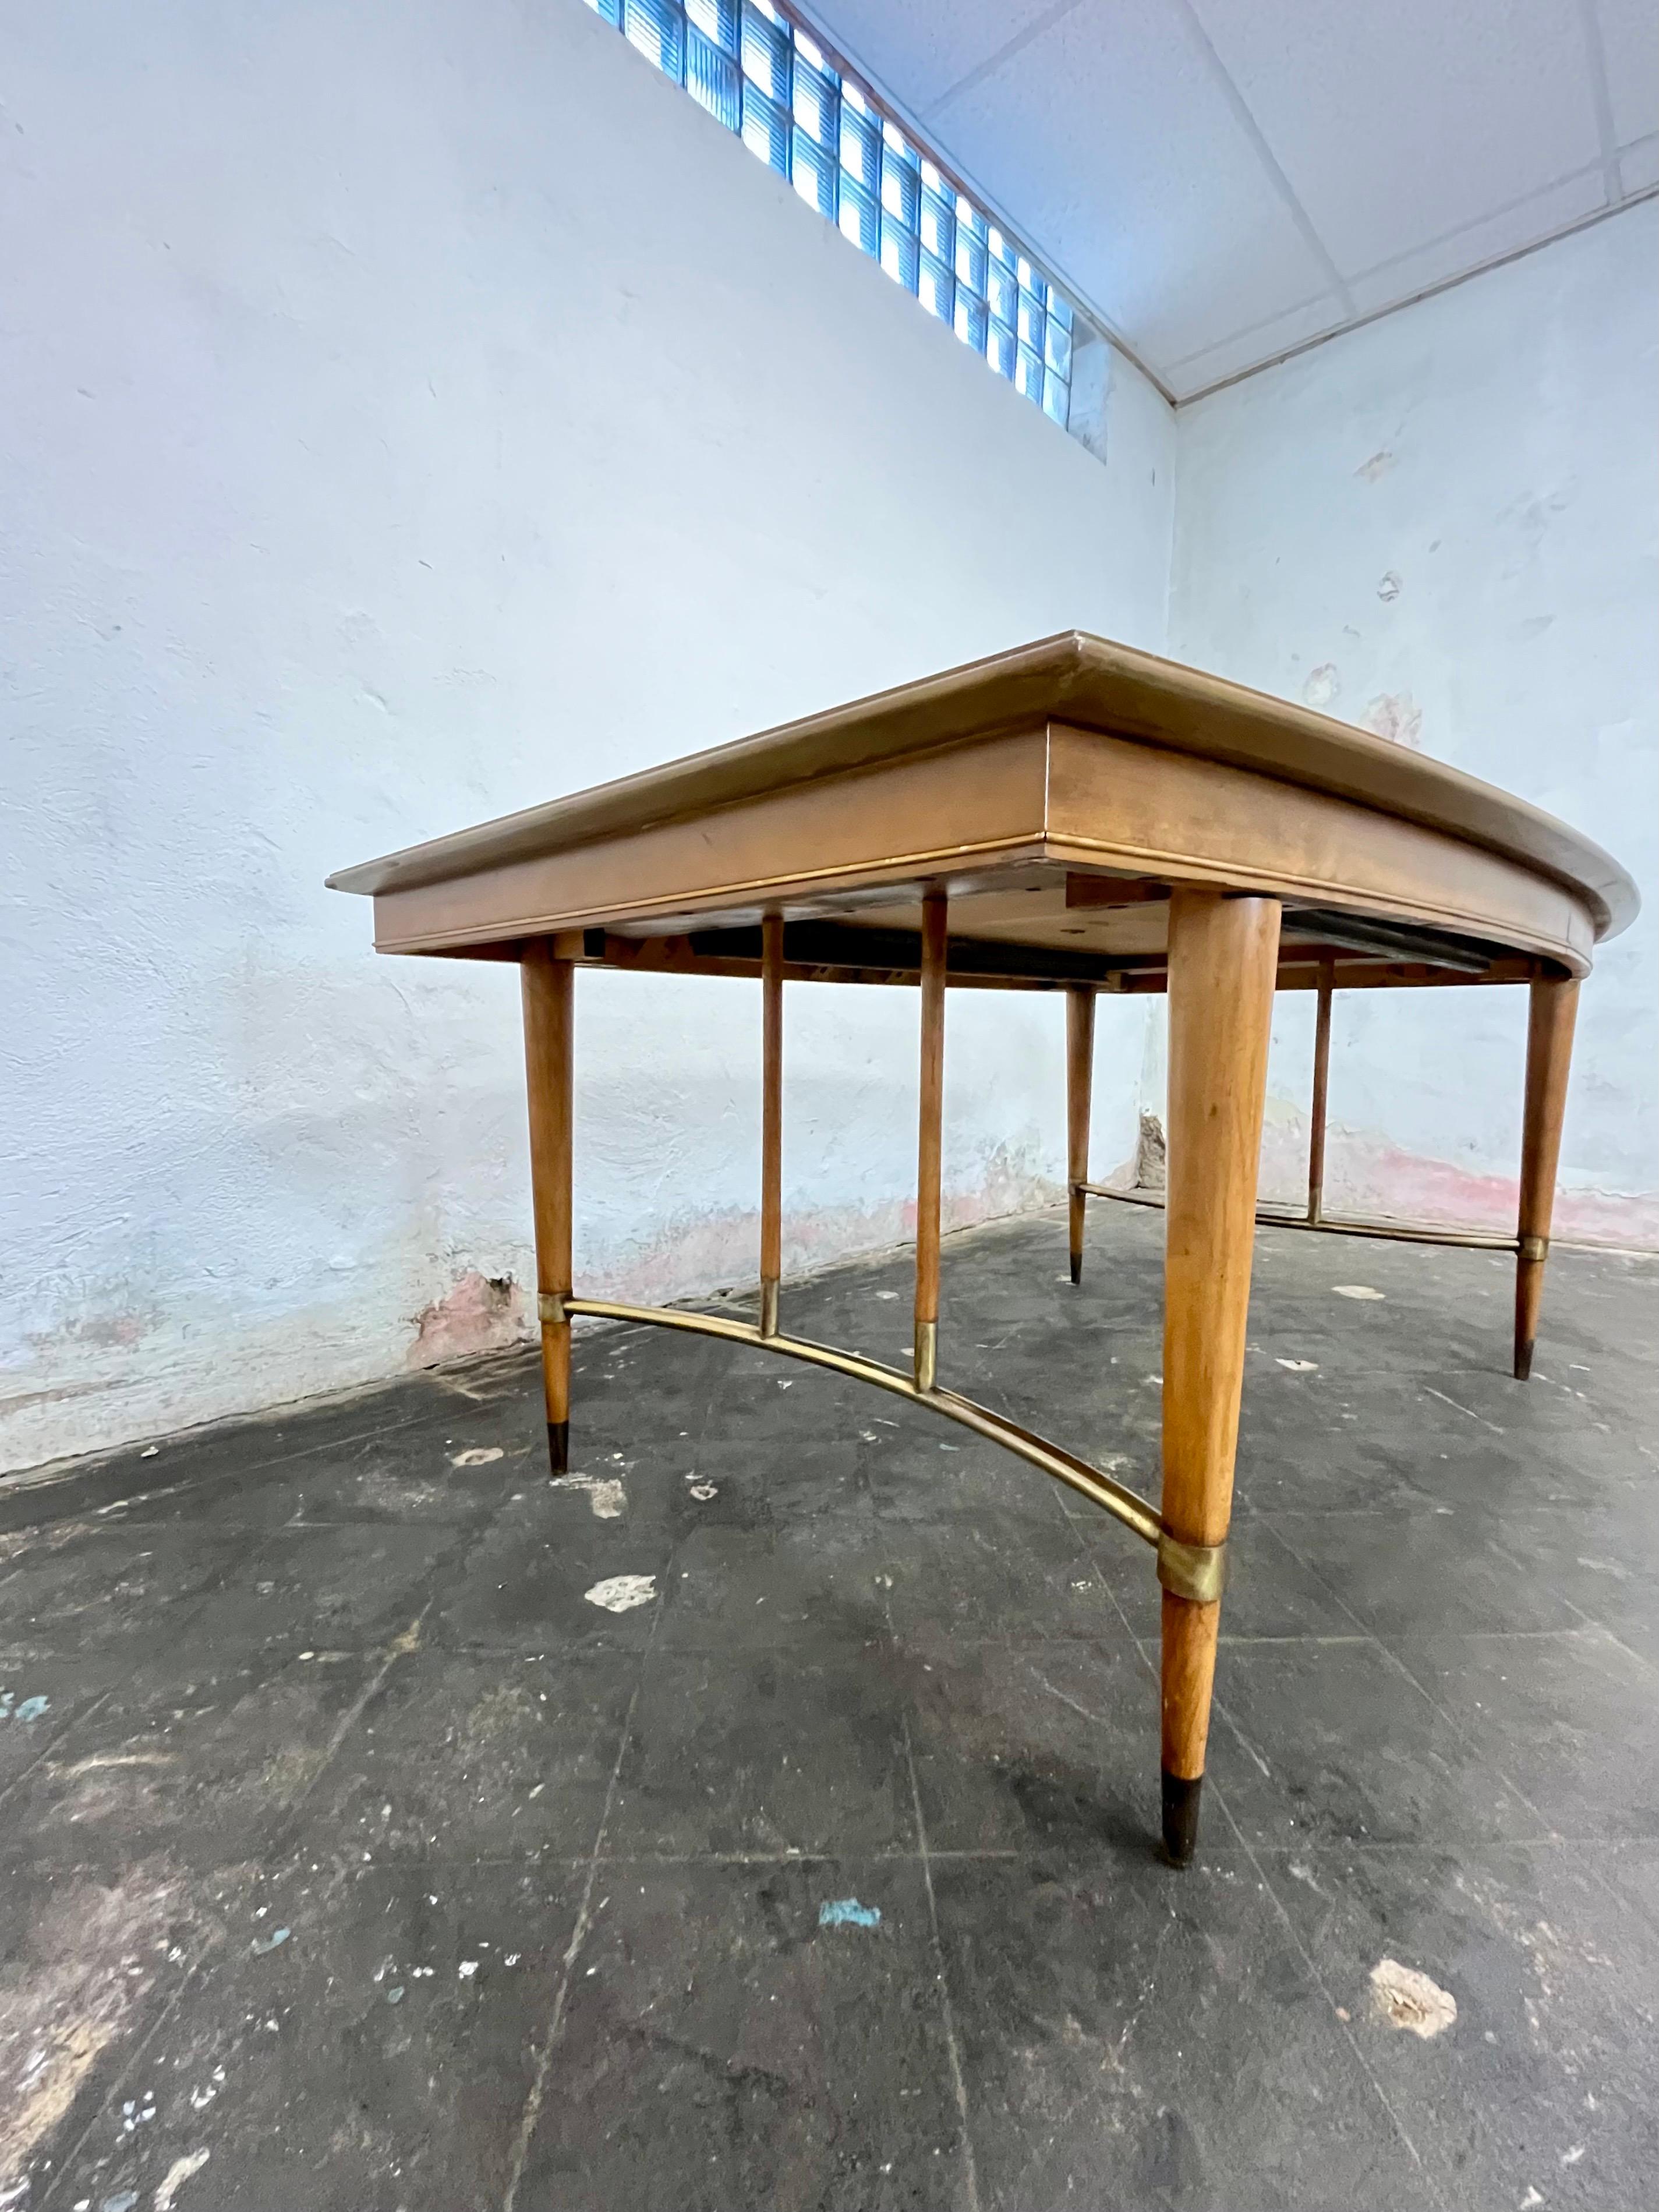 Handsome and sophisticated  mid century dining table by Metz. Great boat shape with matchbook veneer and spectacular brass accents. 2 added leaves open to a large table with room for 10-12. 
Fully extended 99.5